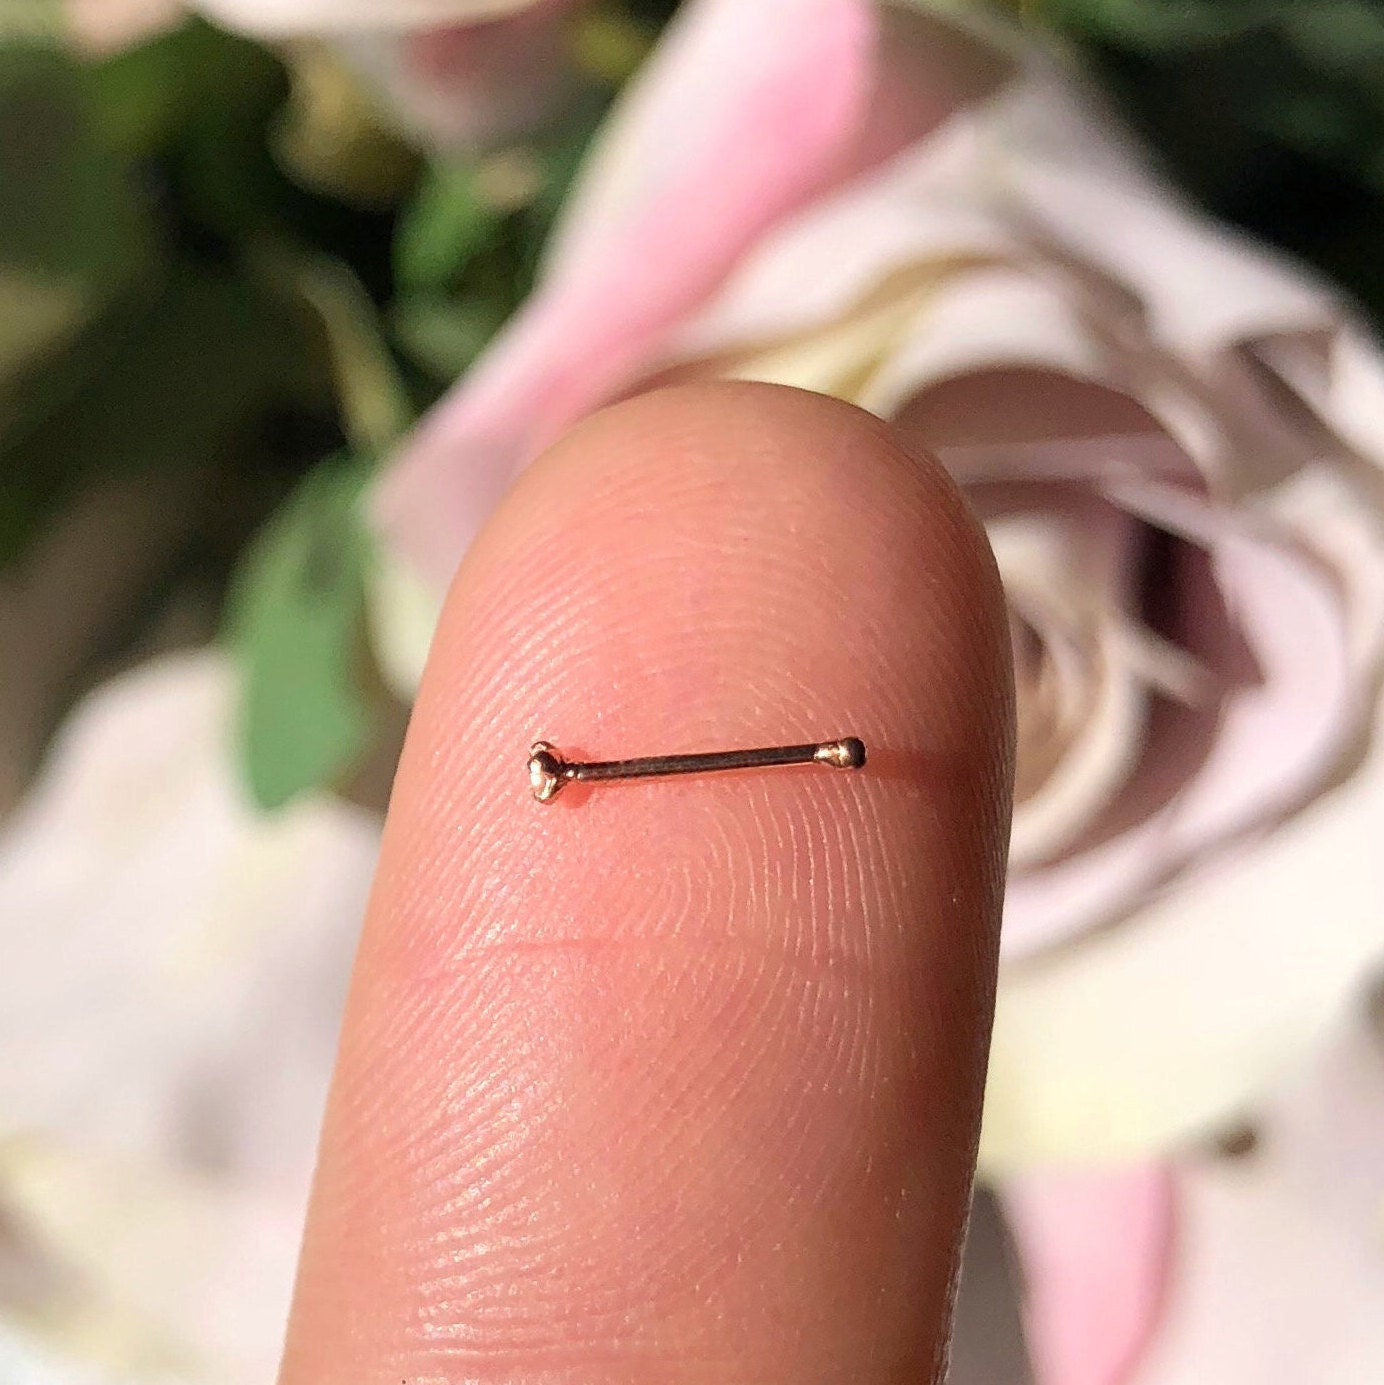 Buy Tiny Diamond Nose Stud Diamond Nose Ring Nose Piercing Jewellery Micro Nose  Stud Sterling Silver Nose Rings Teeny Tiny Nose Stud Diamond Online in  India - Etsy